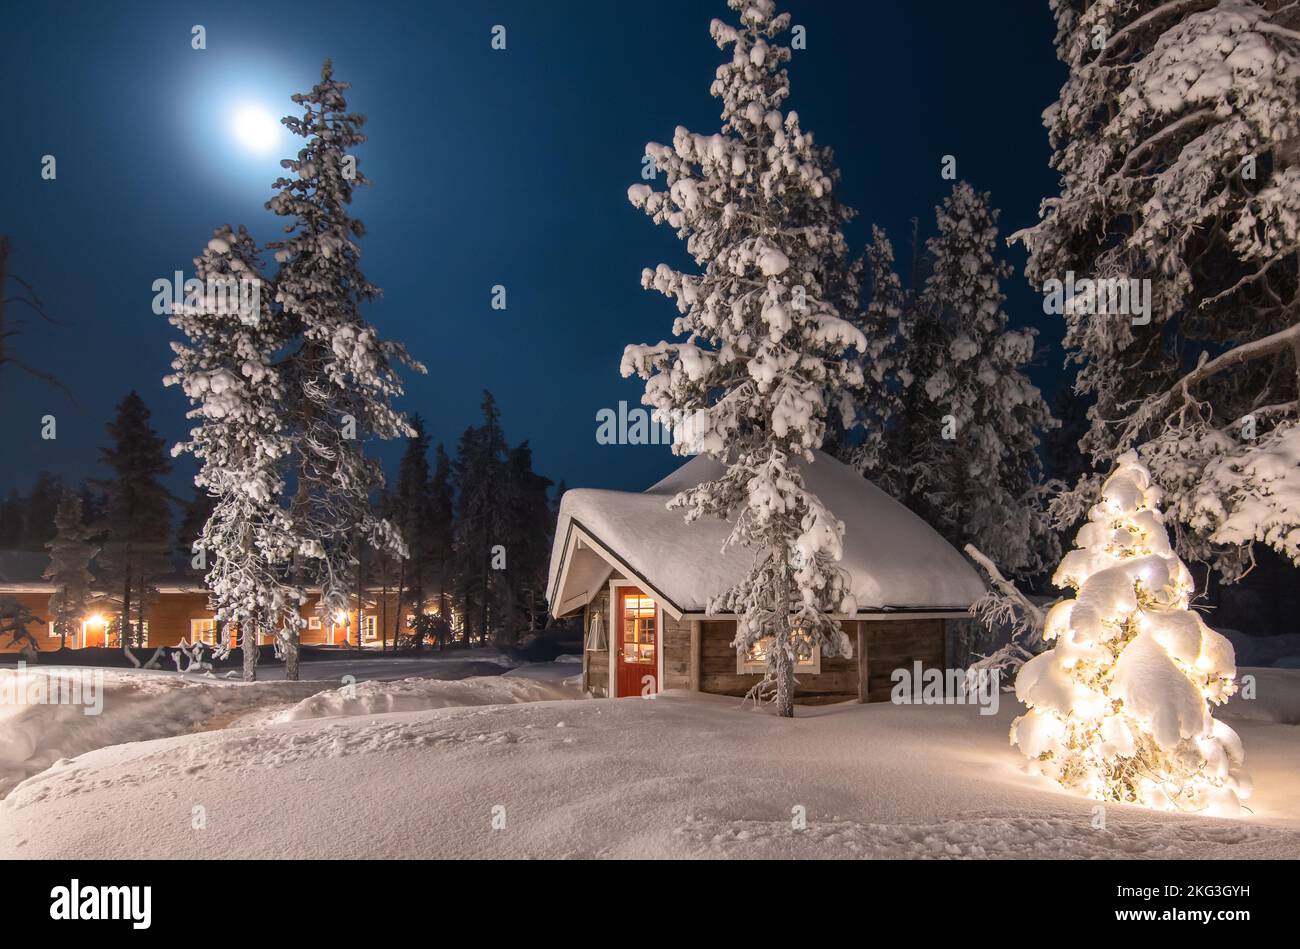 Outdoor winter and Christmas scene with wooden cabin in the woods. Winter forest landscape at full moon, Finland, Lapland. Stock Photo